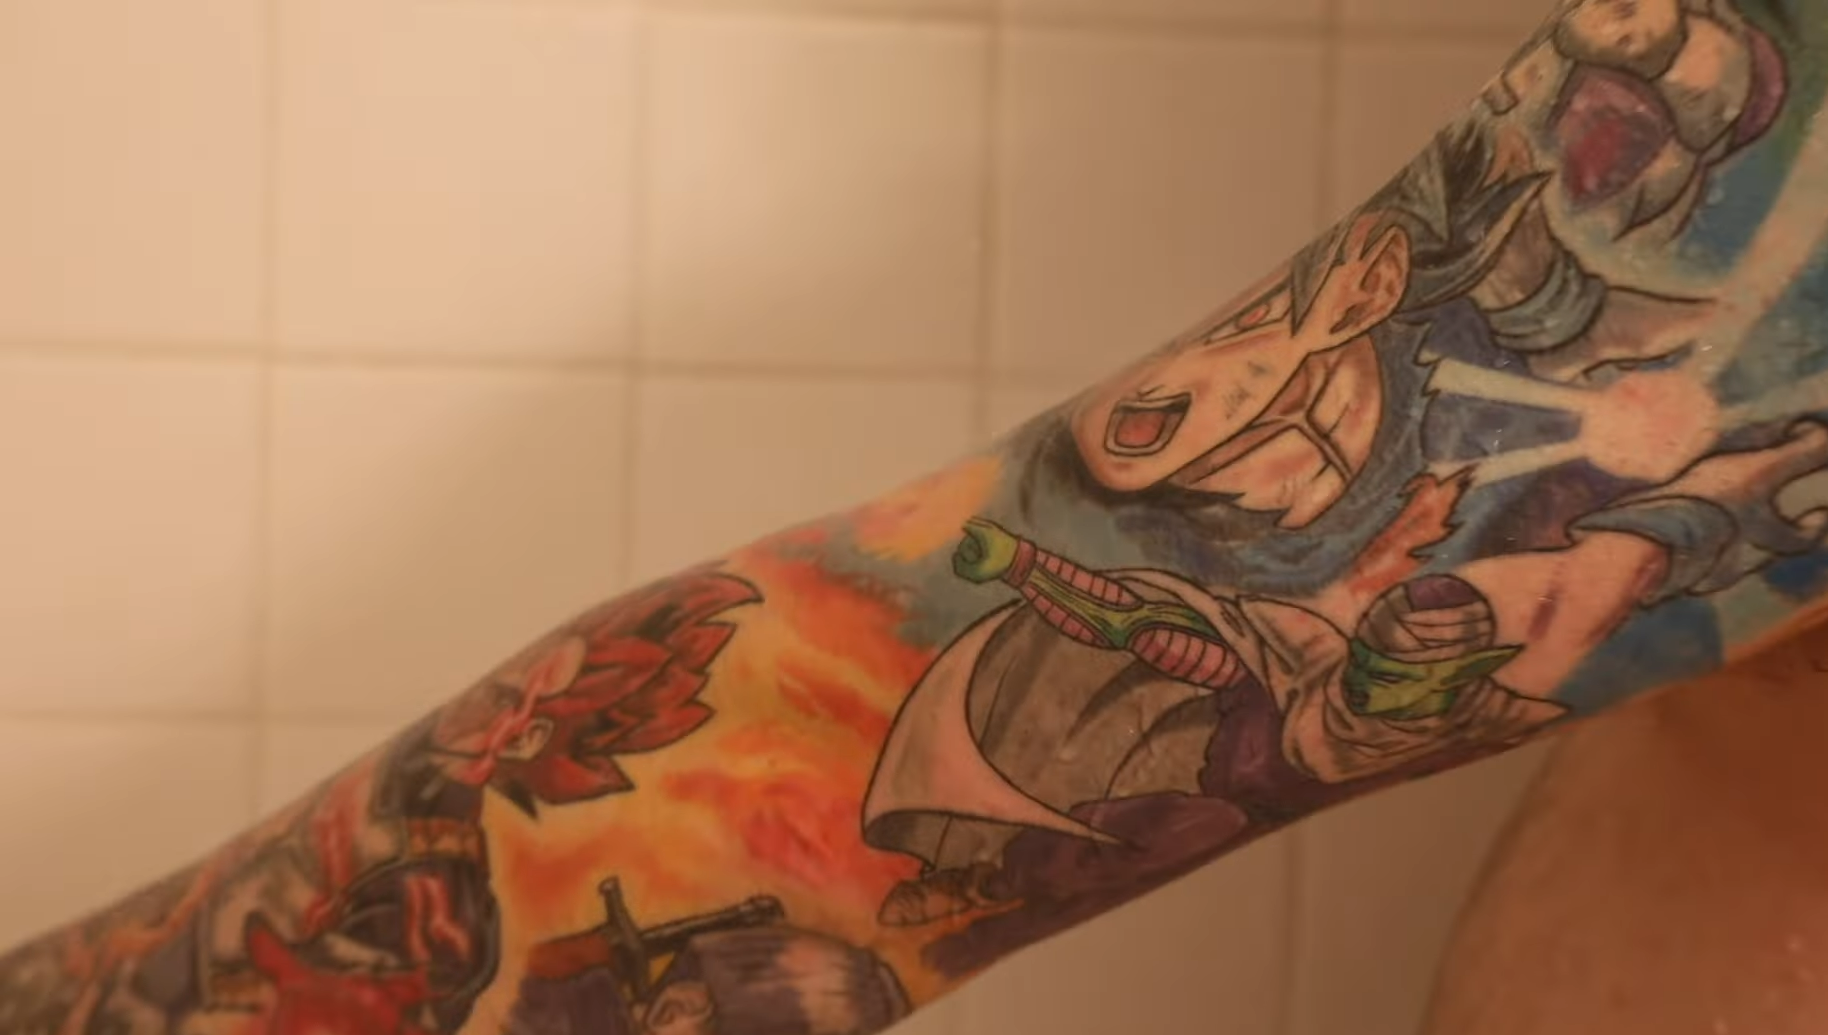 Tips on how to take care of your fresh tattoo